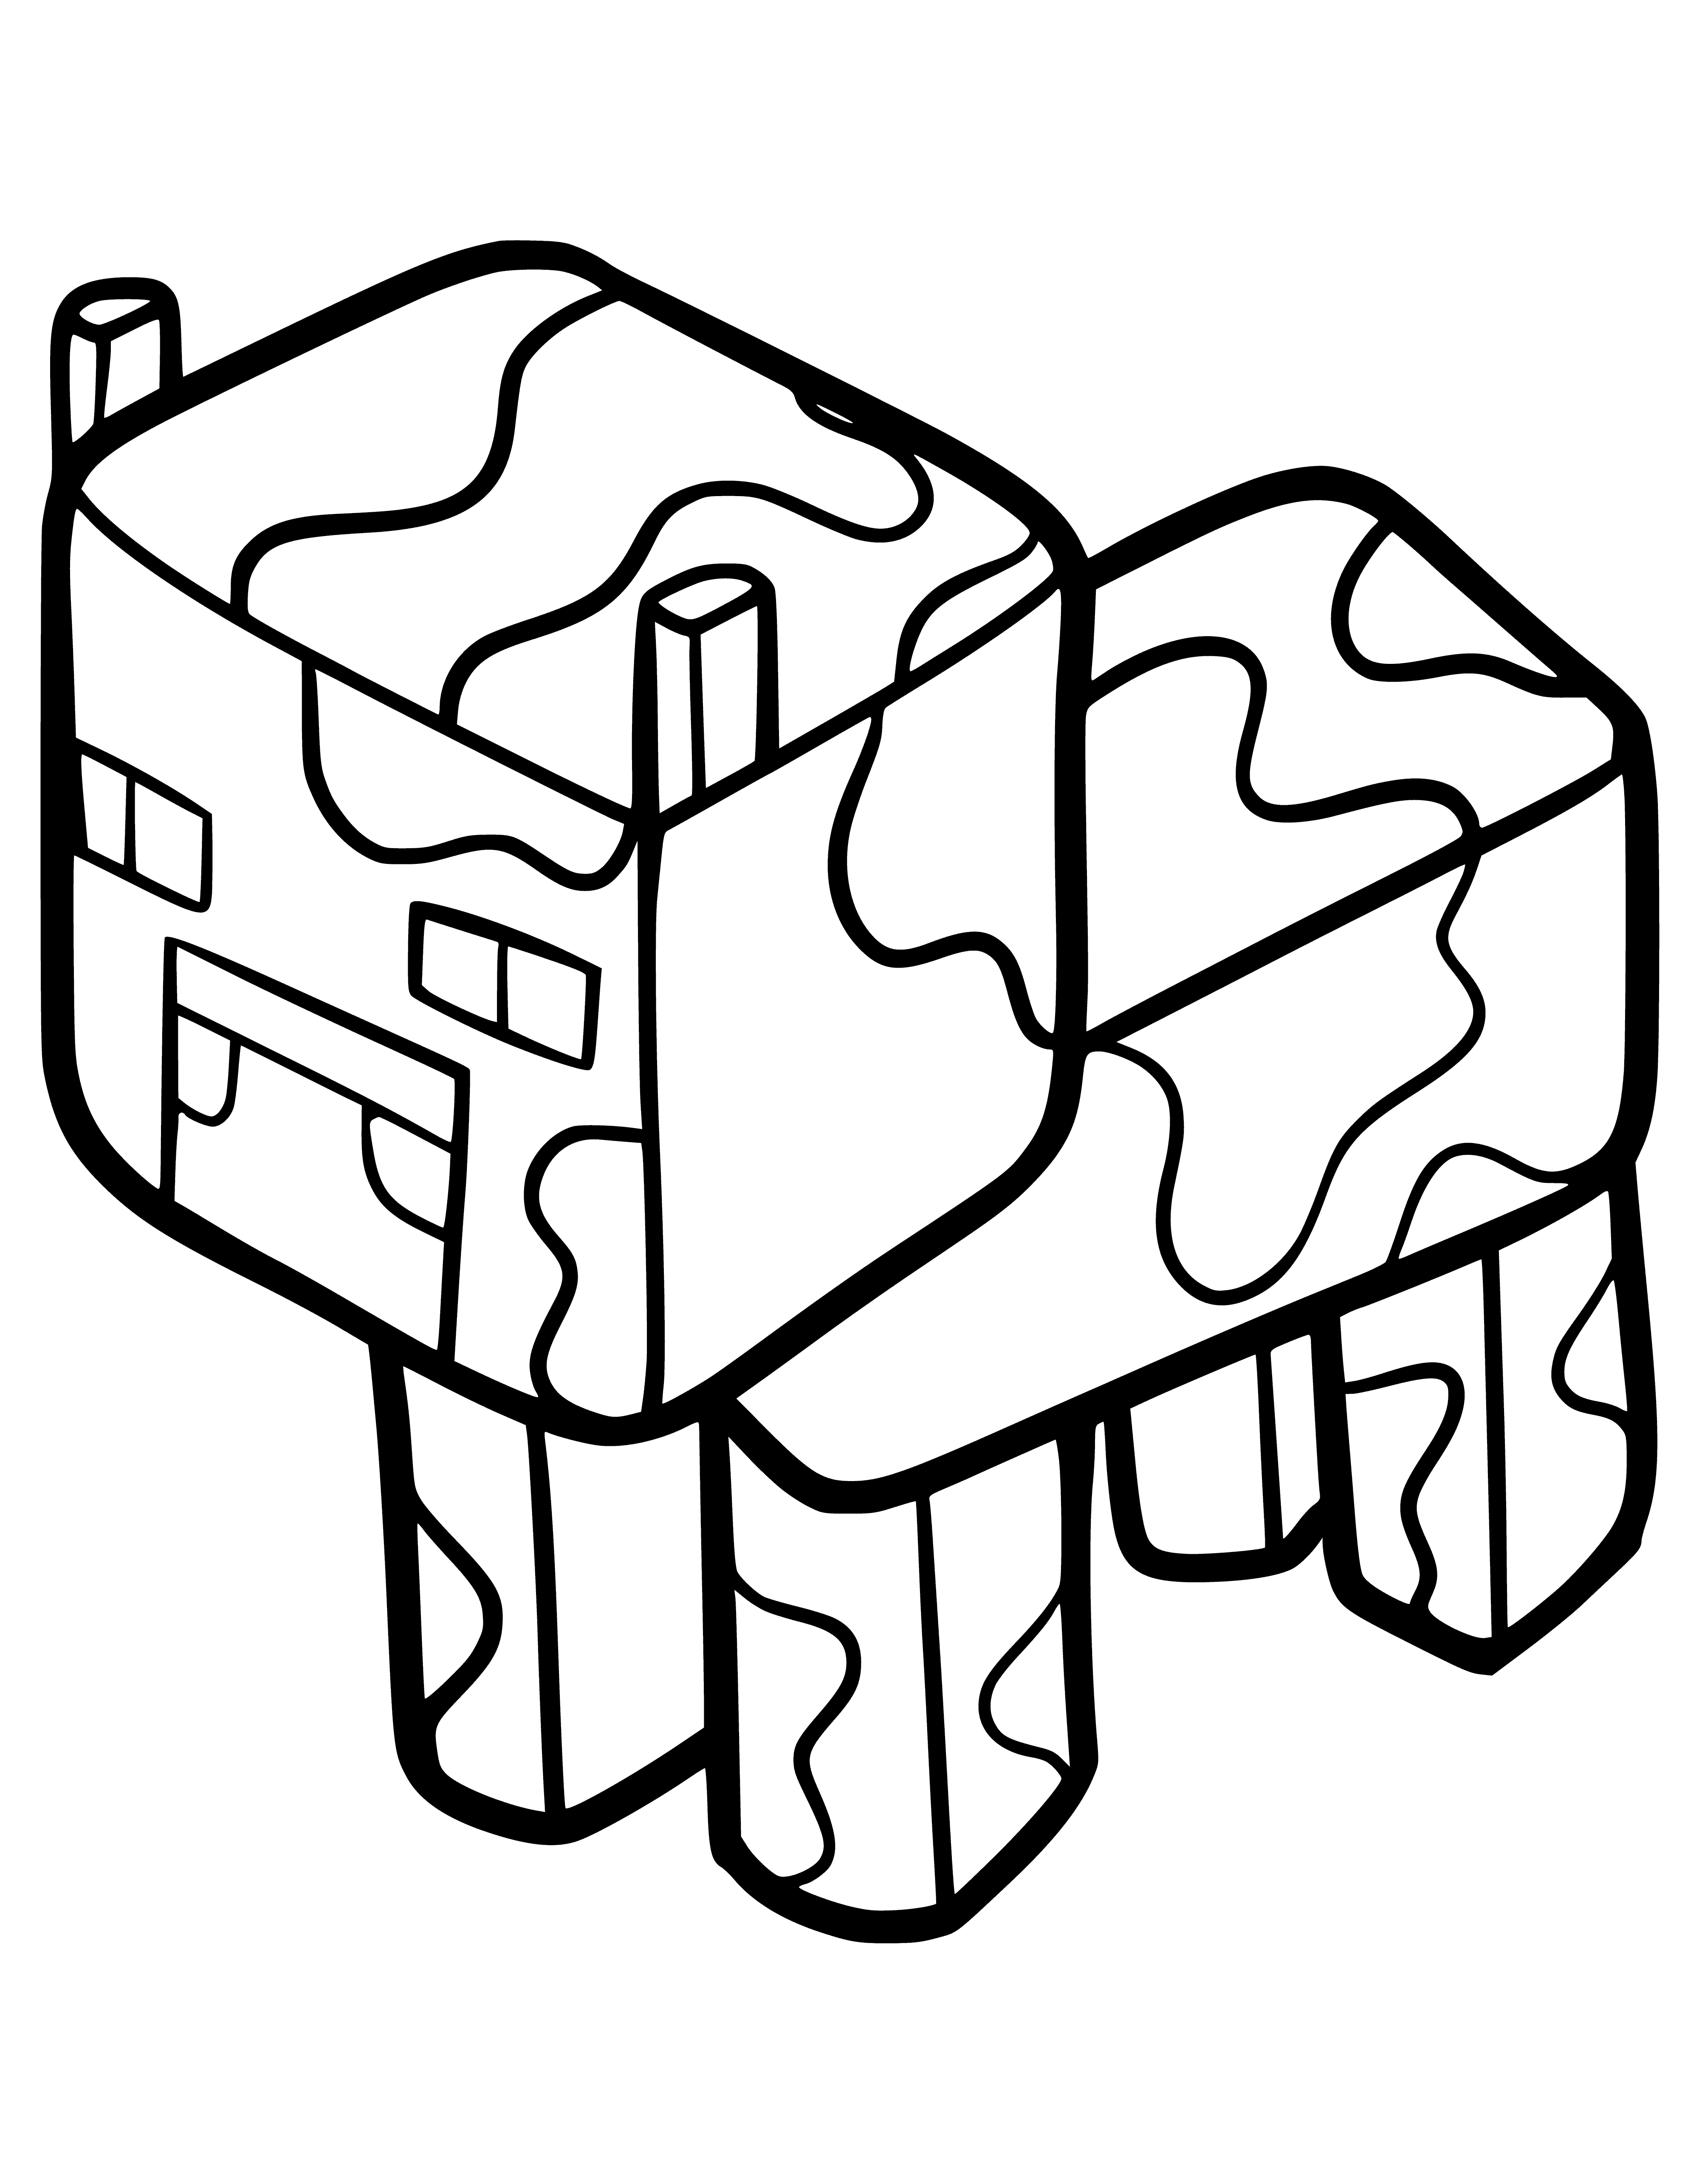 Cow in Minecraft coloring page